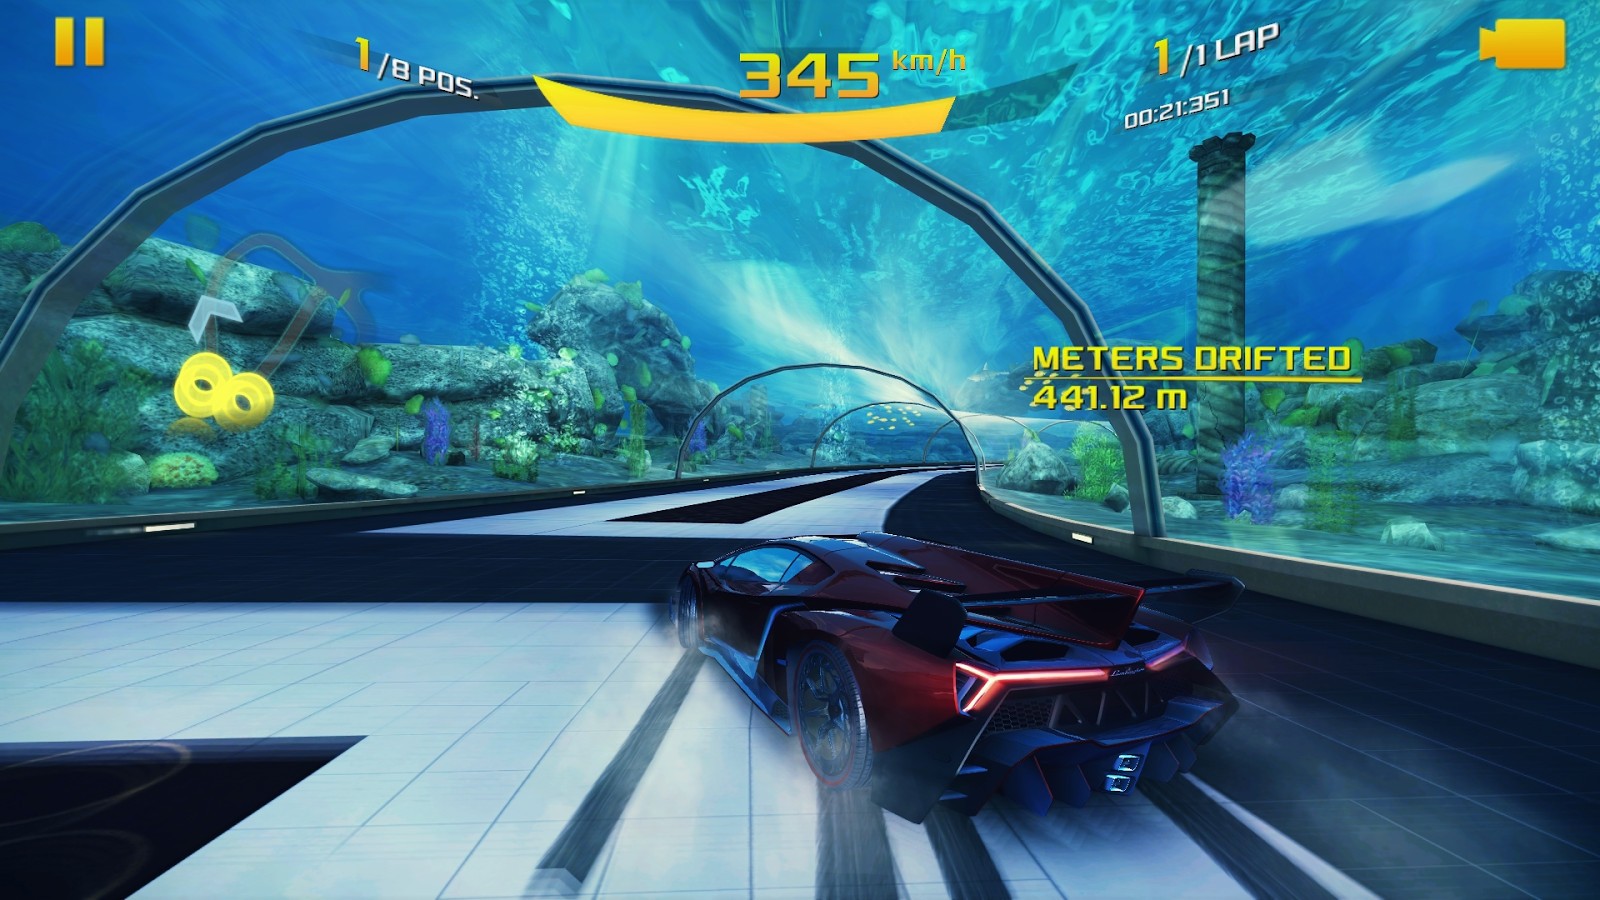 asphalt 8 airborne free download for pc windows 10 without store